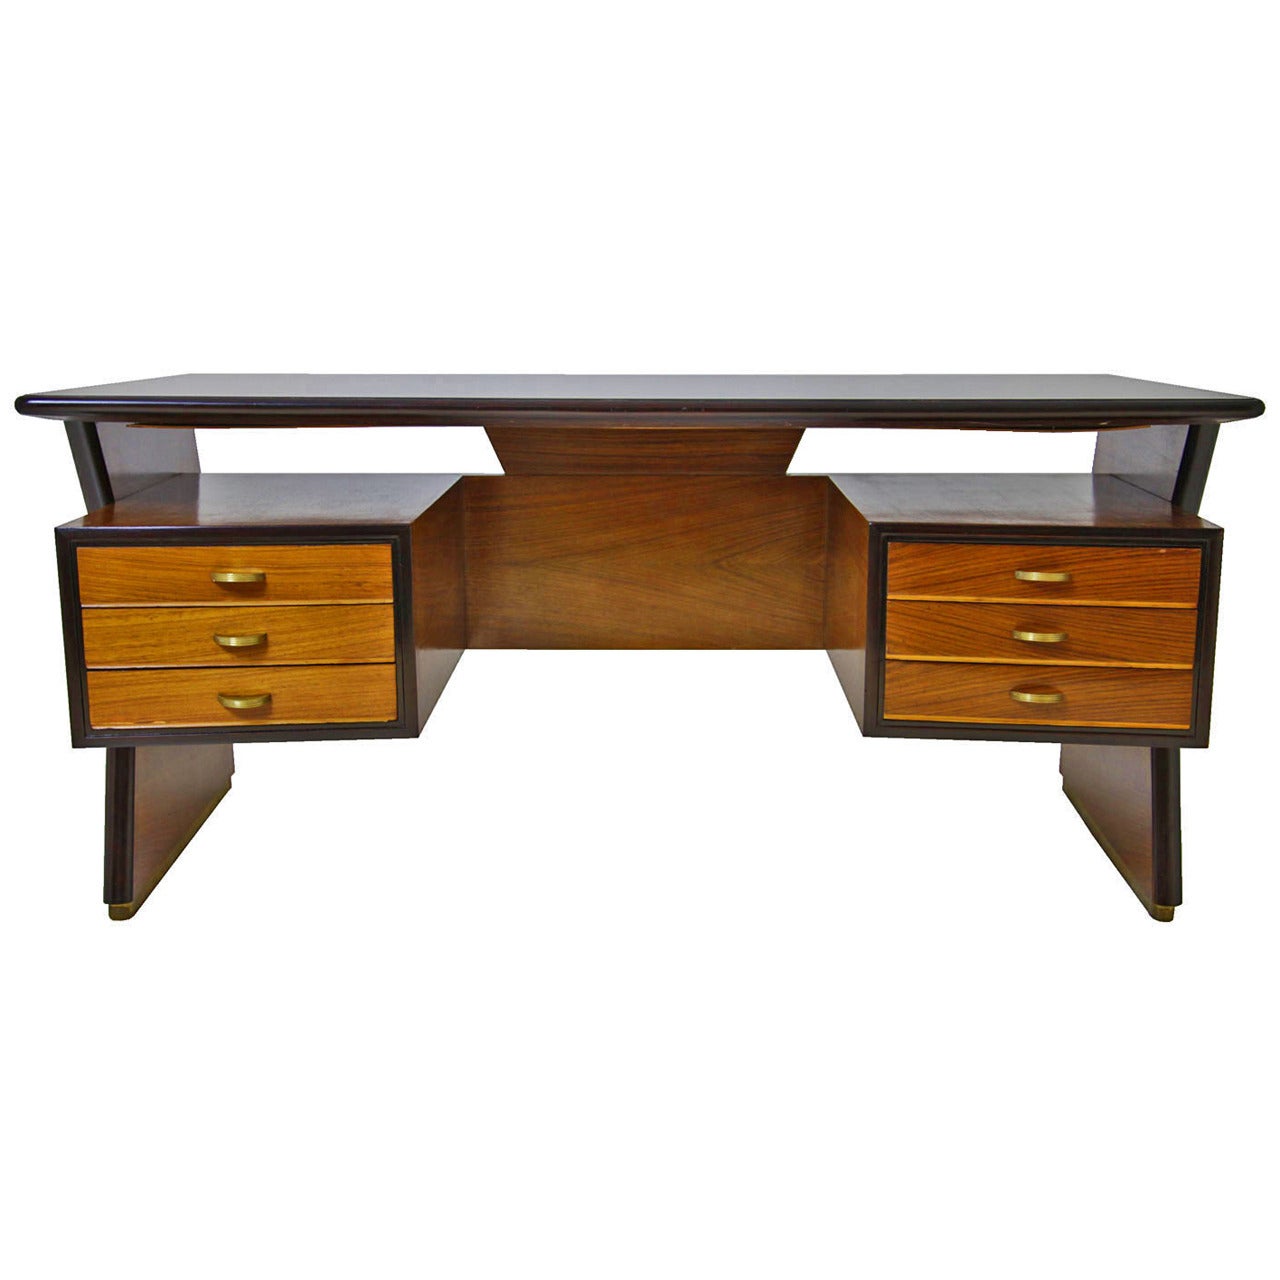 Wonderful Italian Desk, Dating from the 1940s